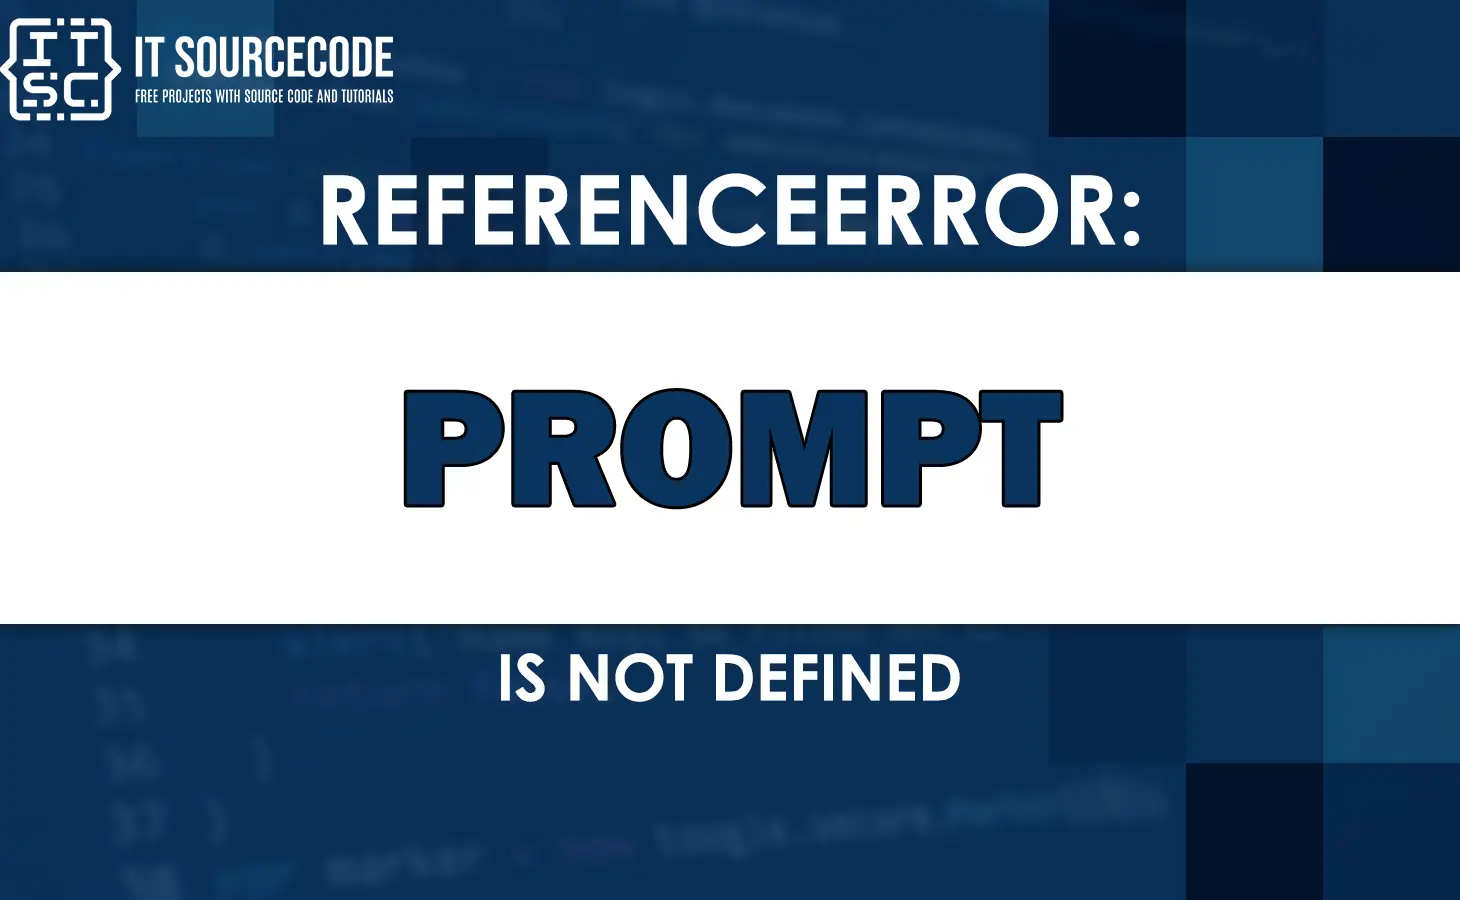 referenceerror prompt is not defined